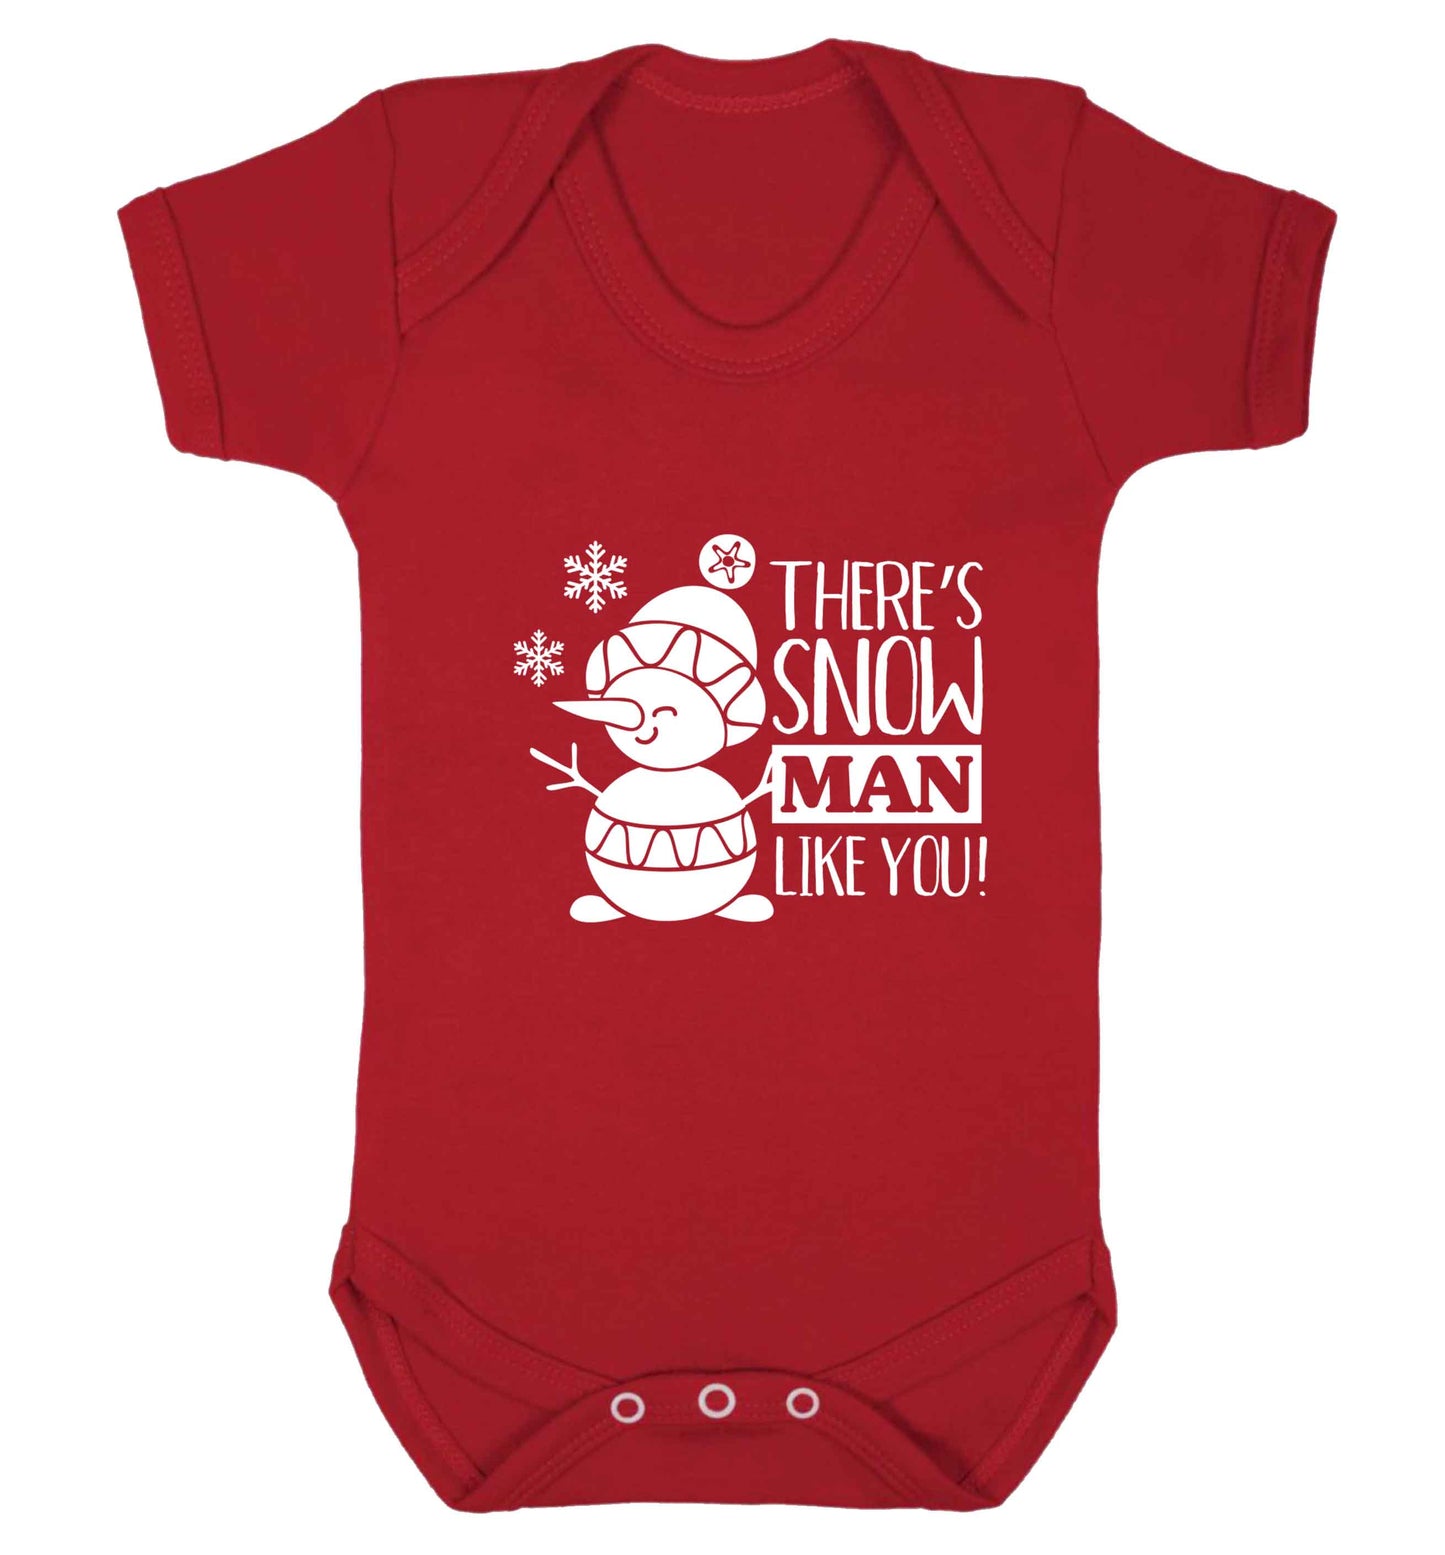 There's snow man like you baby vest red 18-24 months